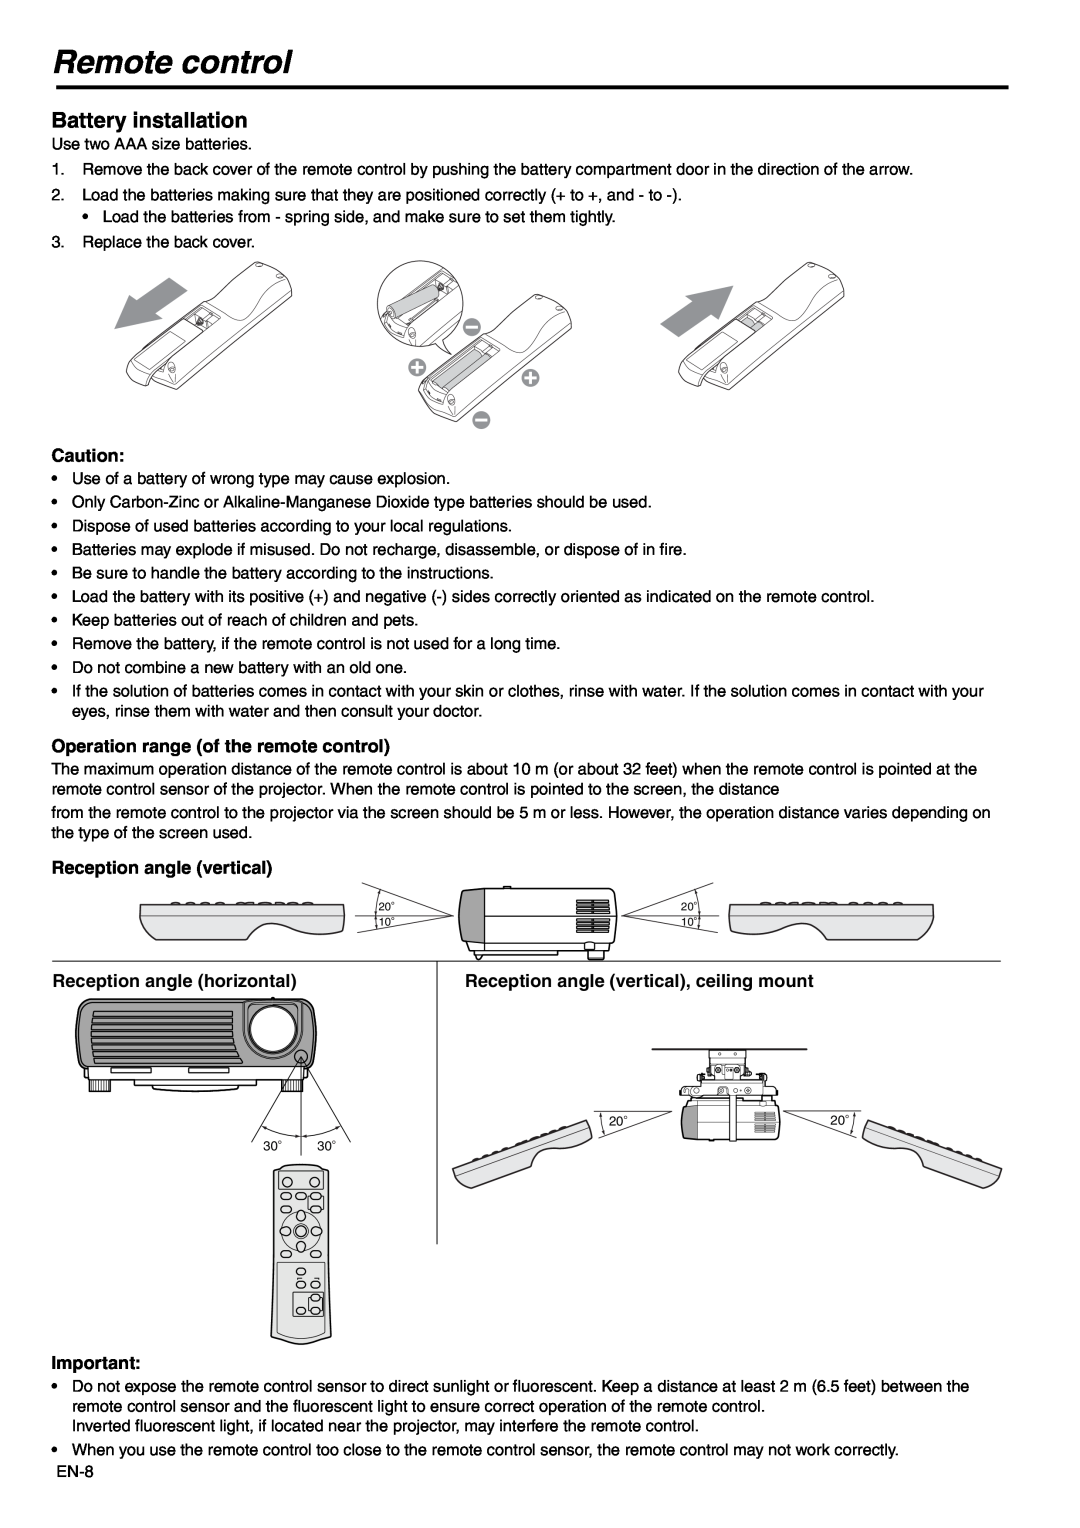 Mitsubishi Electronics XD110, SD110 user manual Remote control, Battery installation, Operation range of the remote control 